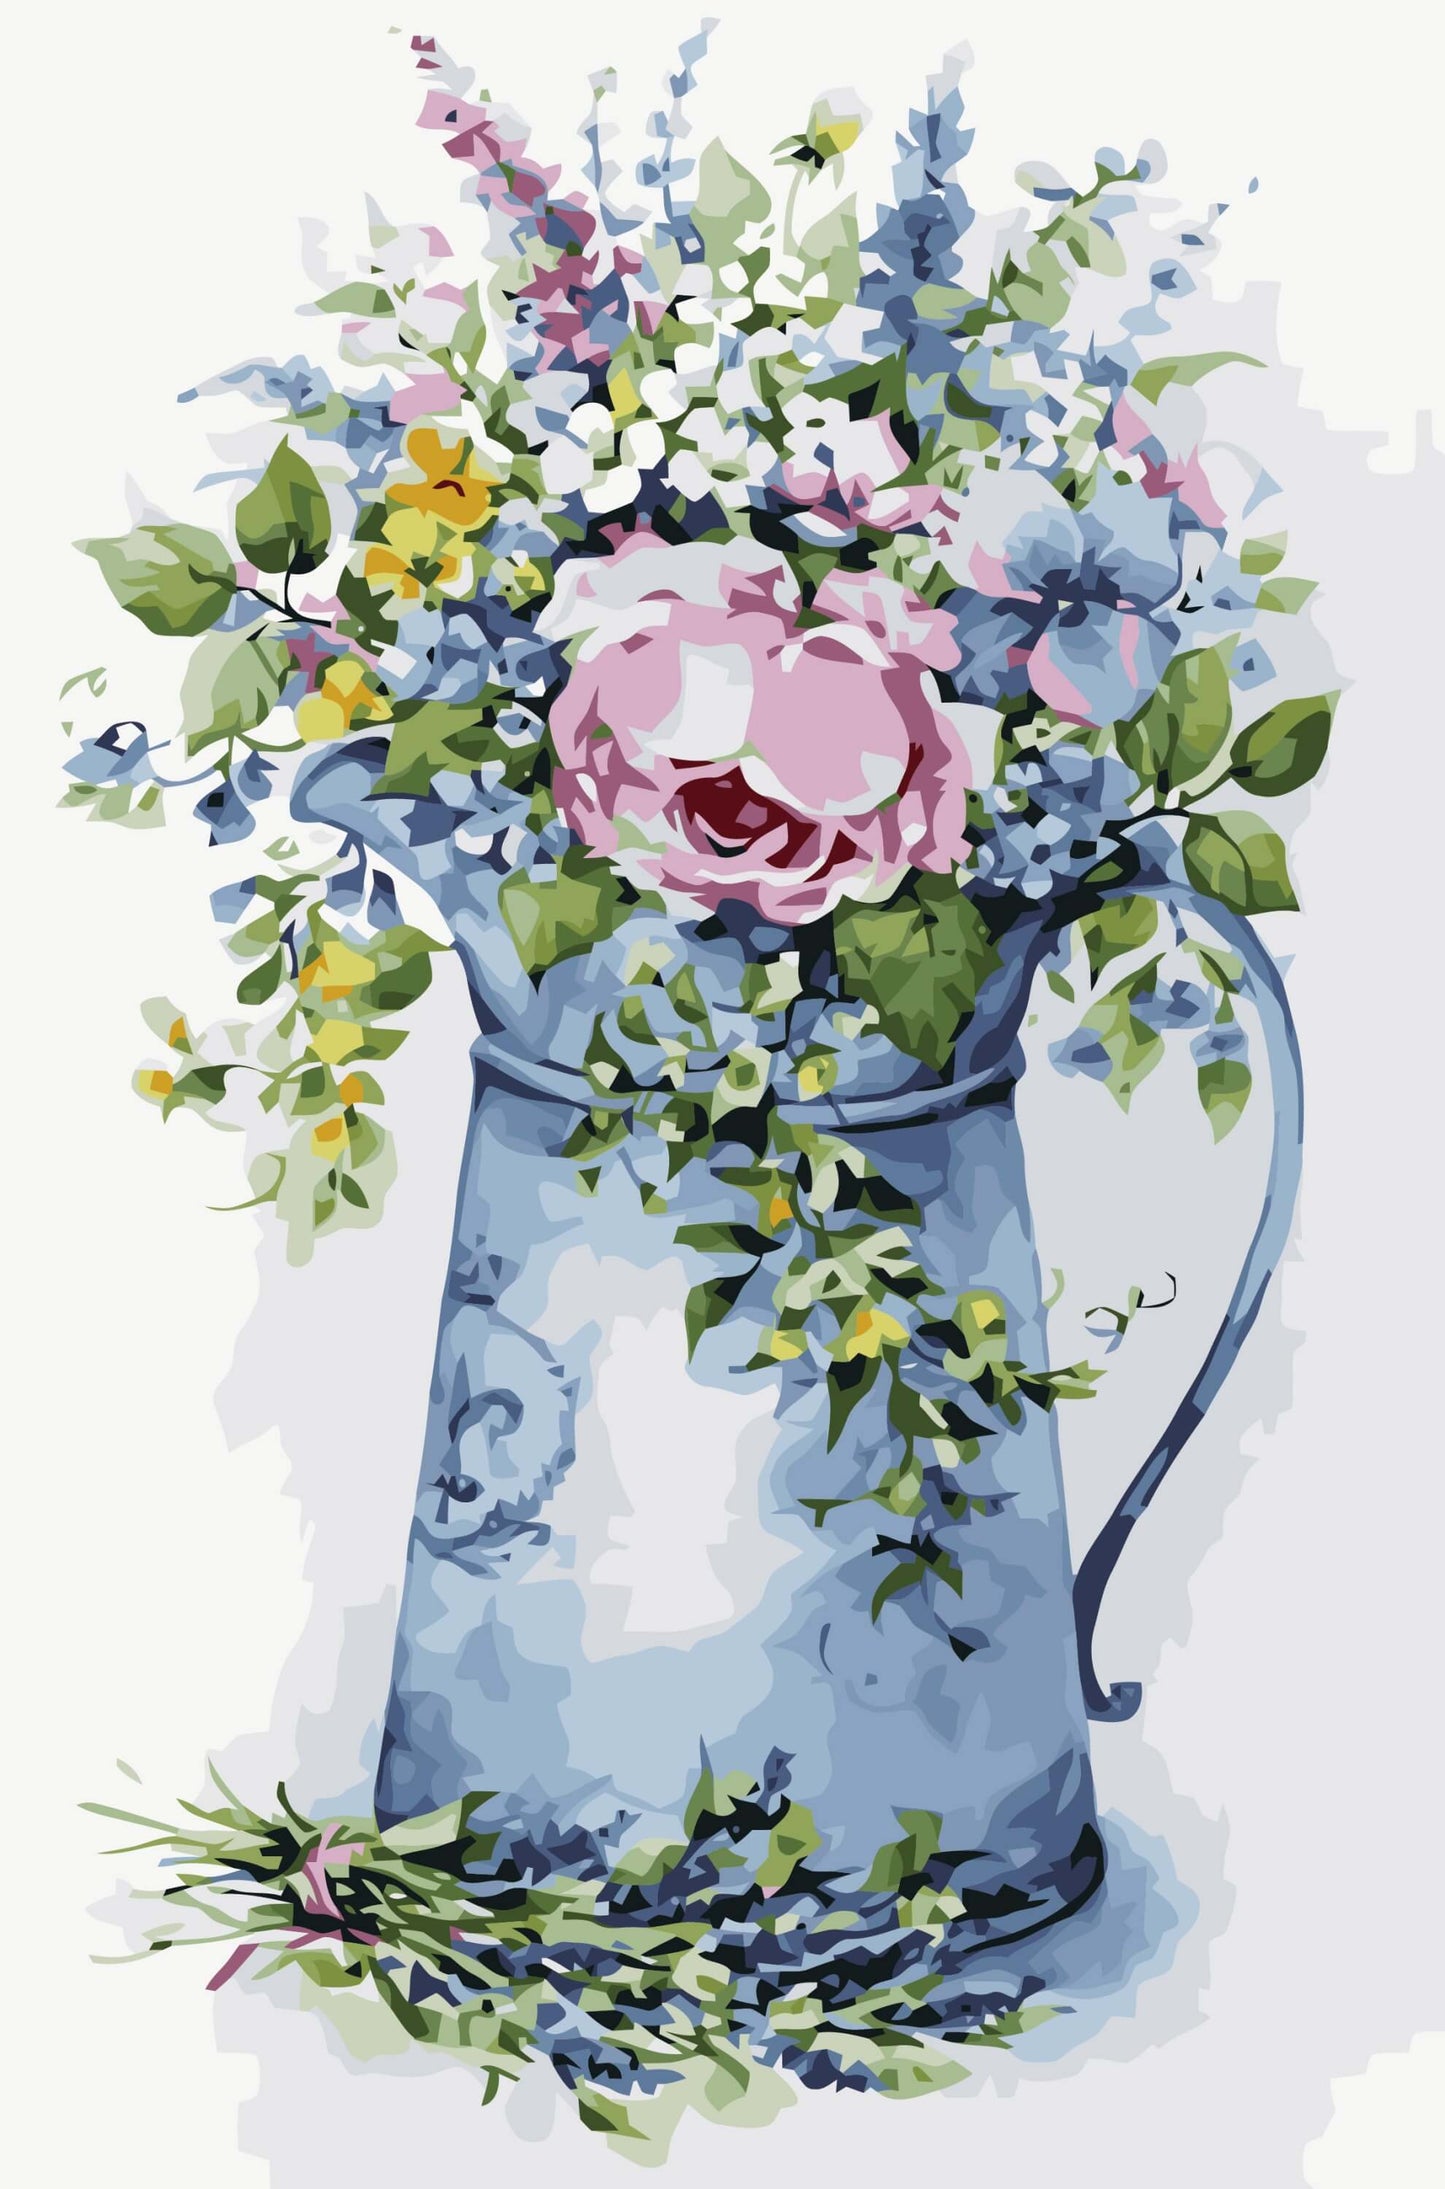 MG2104e - Romantic bouquet in a watering can